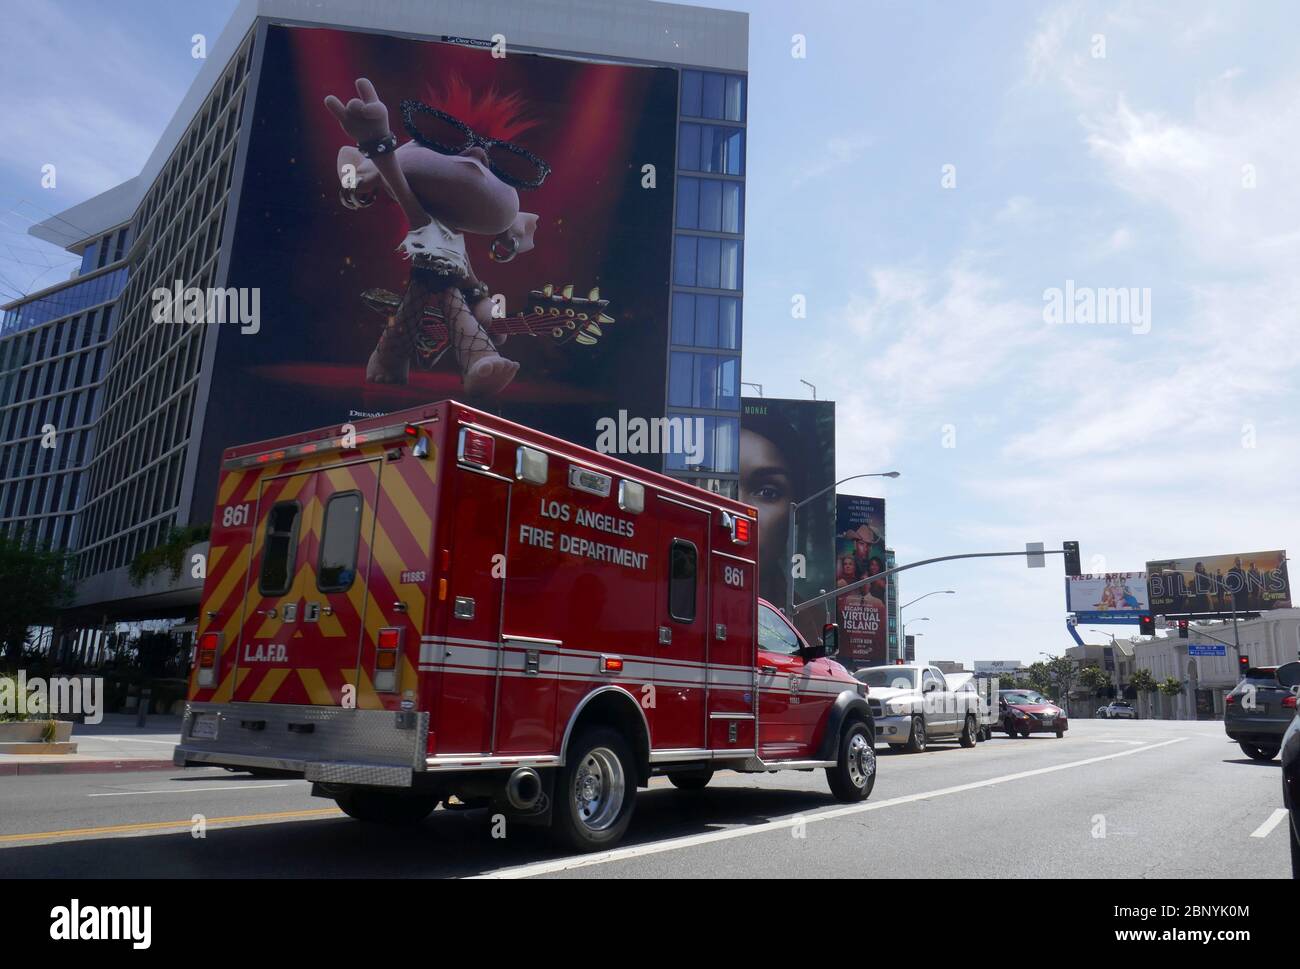 Los Angeles, California, USA 16th May 2020 A general view of atmosphere of Fire Truck and Traffic on with Trolls World tour Billboard on Sunset Blvd during Coronavirus Covid-19 Pandemic on May 16, 2020 in Los Angeles, California, USA. Photo by Barry King/Alamy Stock Photo Stock Photo